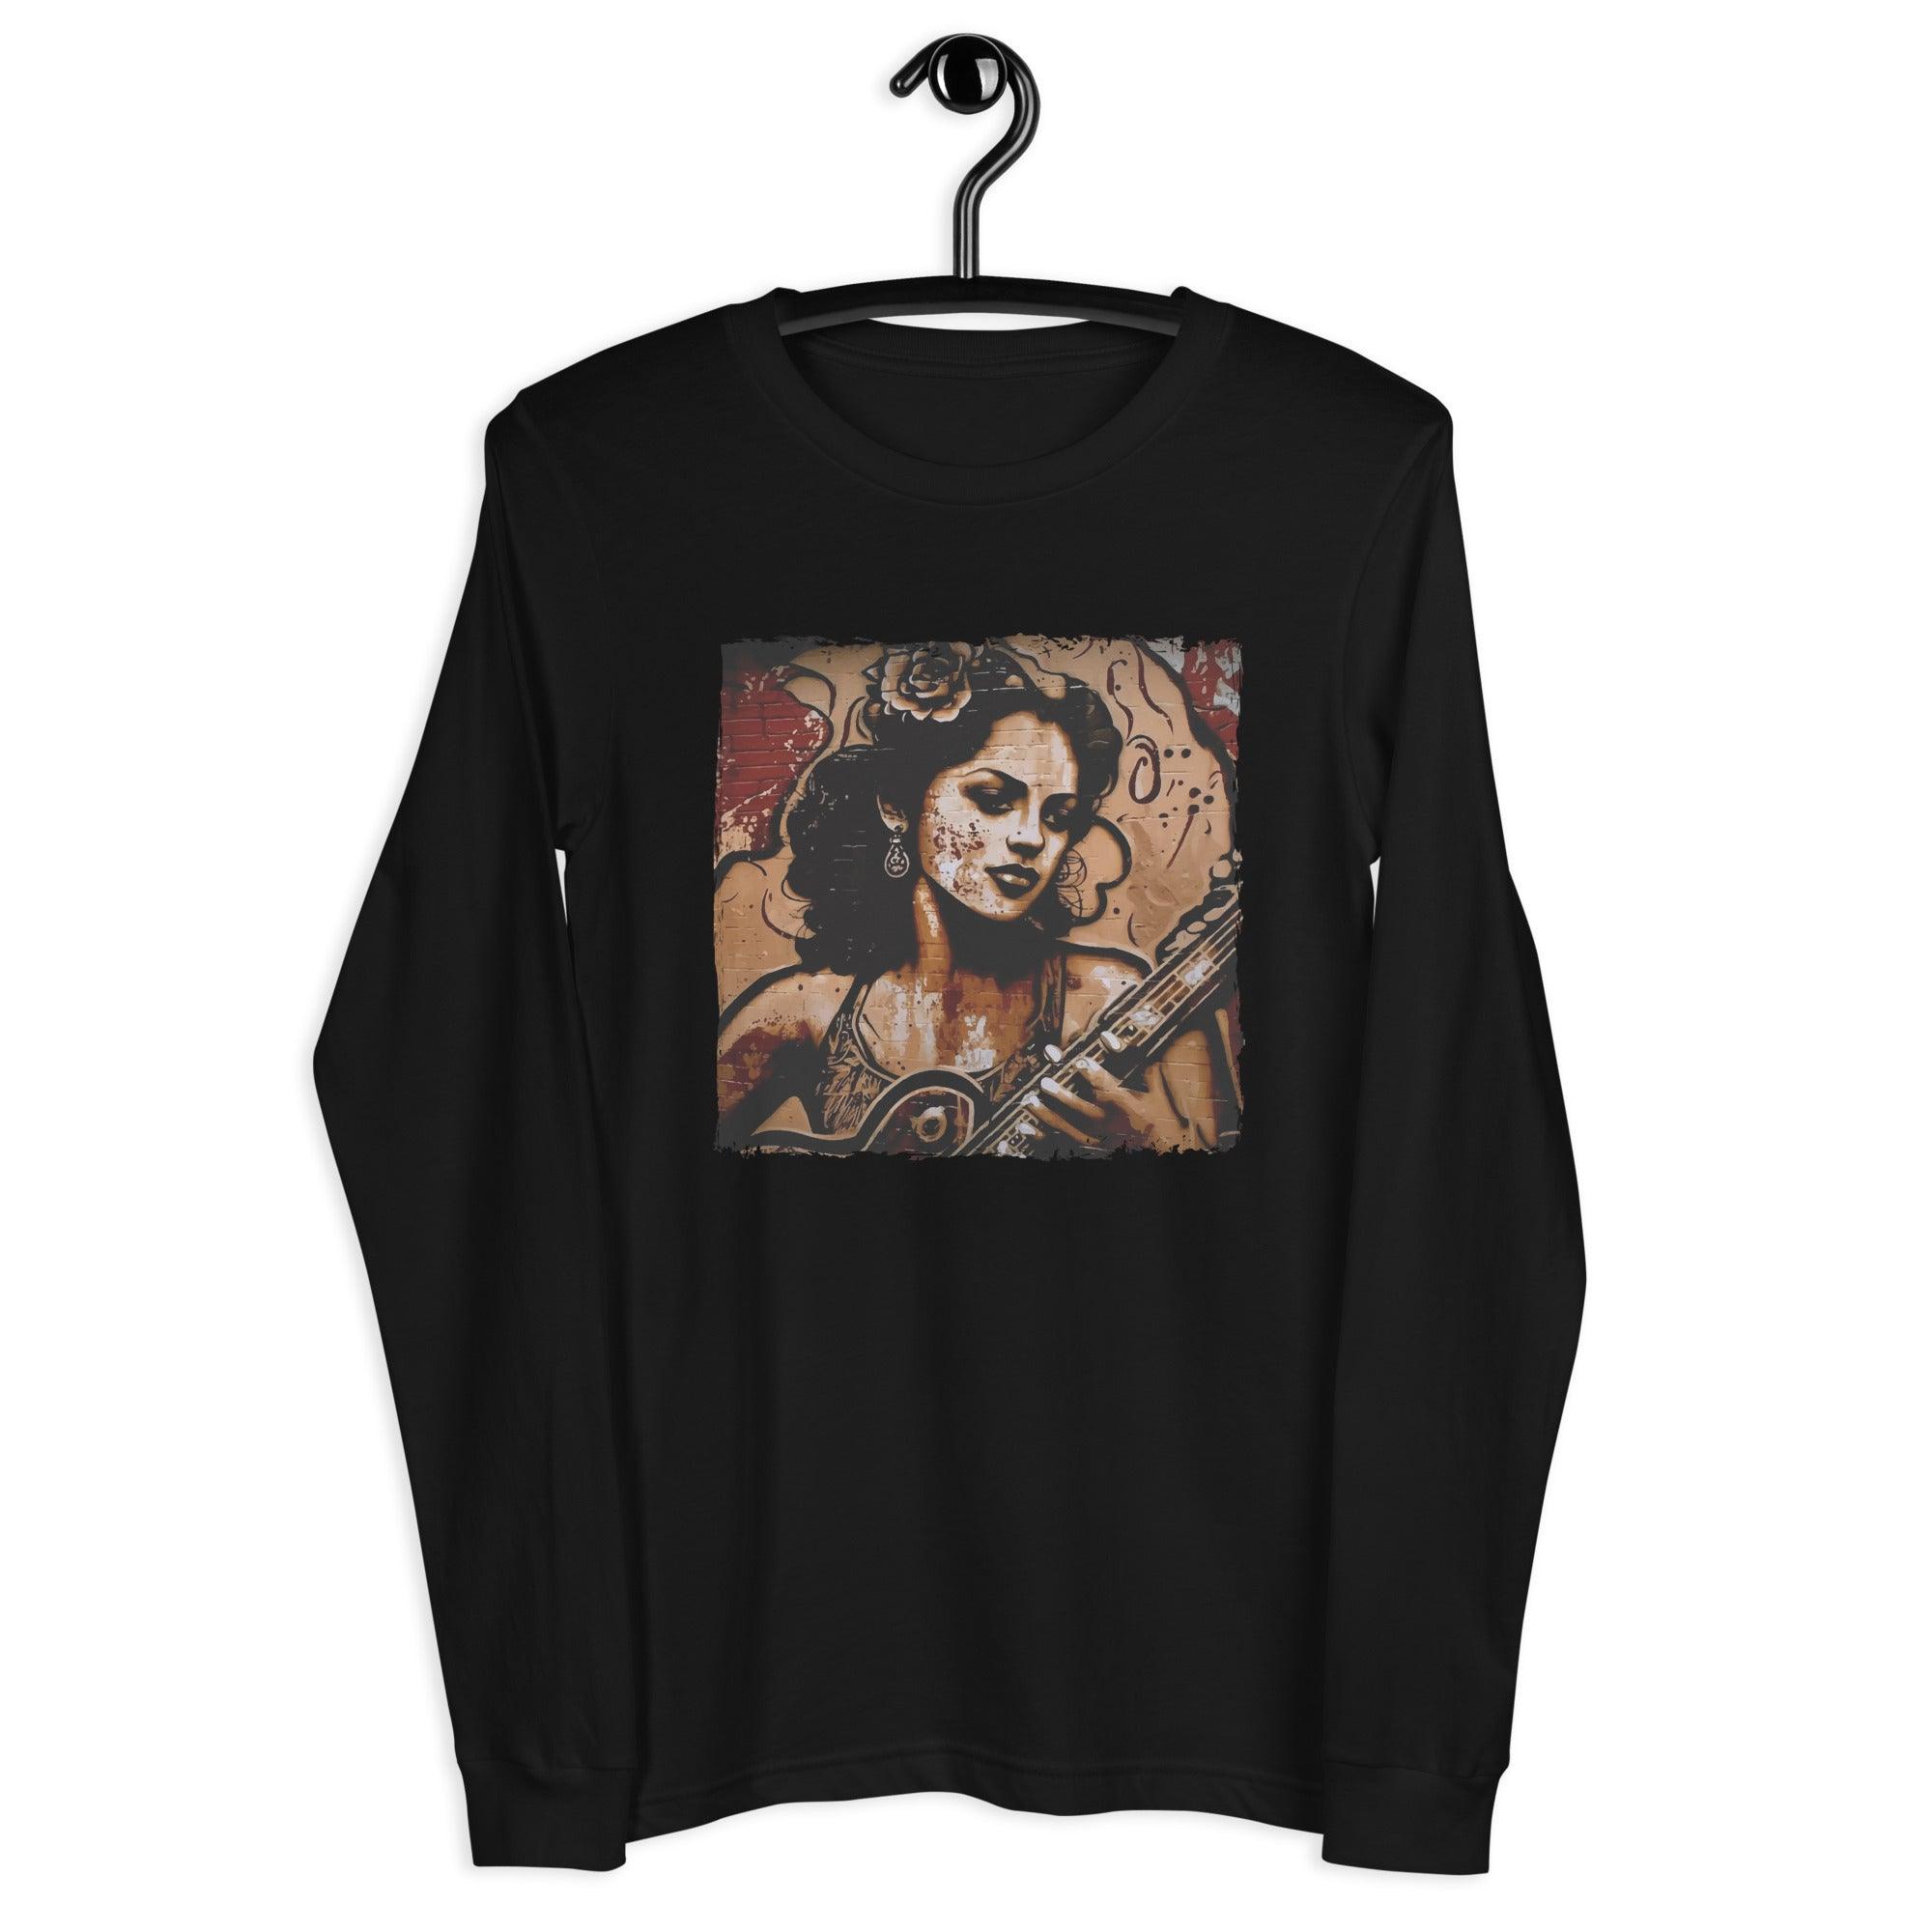 Flowing Passion Roaring Guitar Unisex Long Sleeve Tee - Beyond T-shirts